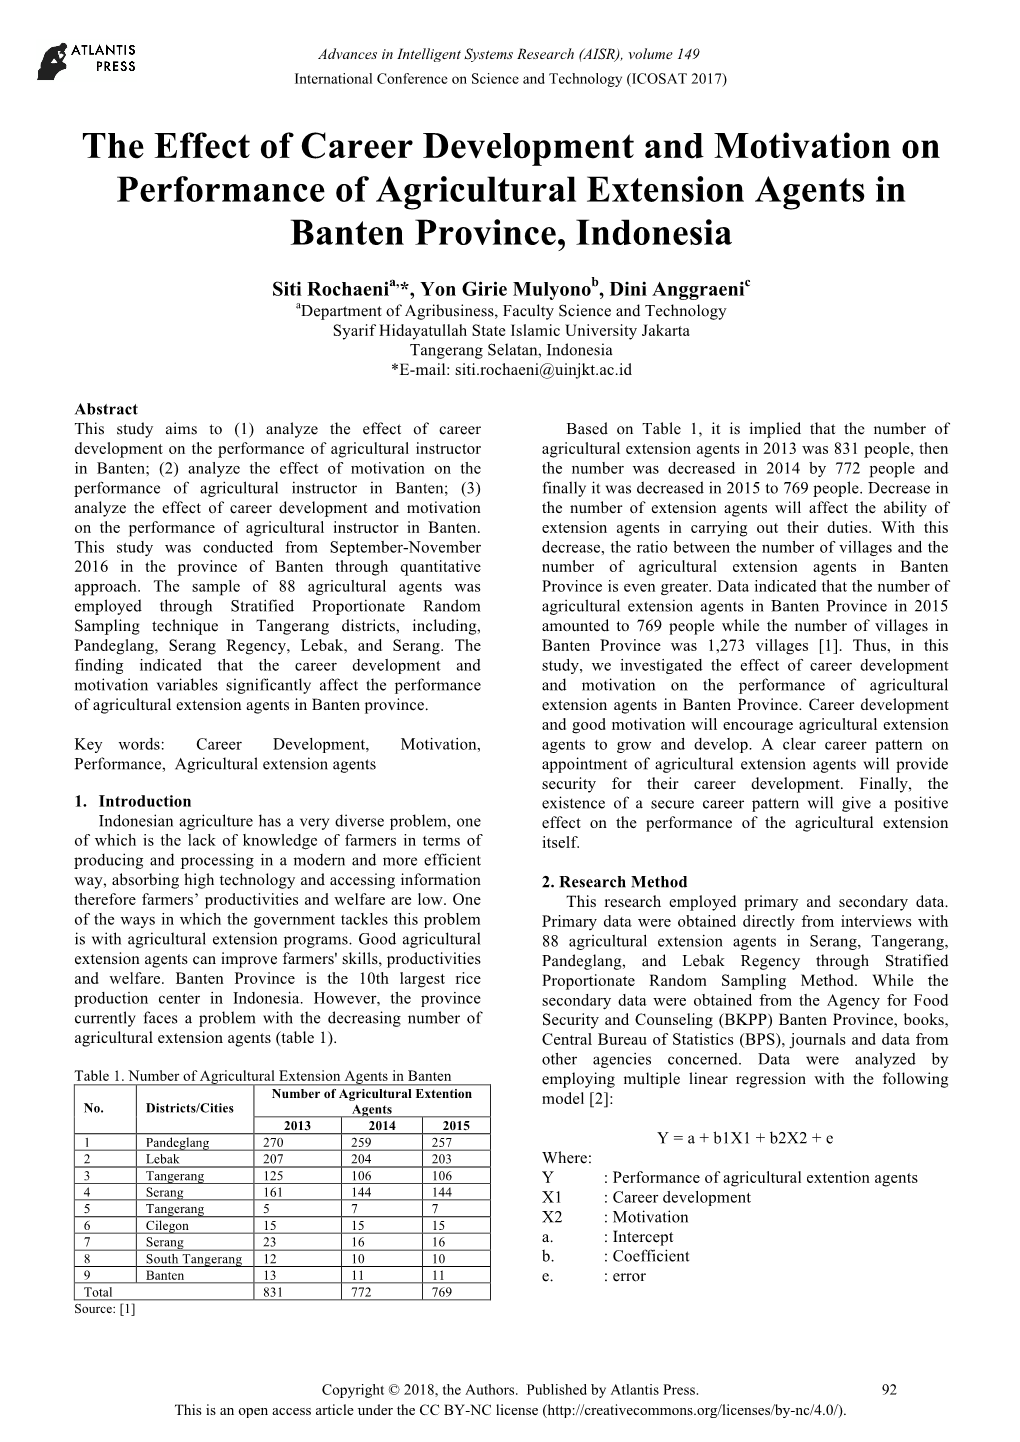 The Effect of Career Development and Motivation on Performance of Agricultural Extension Agents in Banten Province, Indonesia